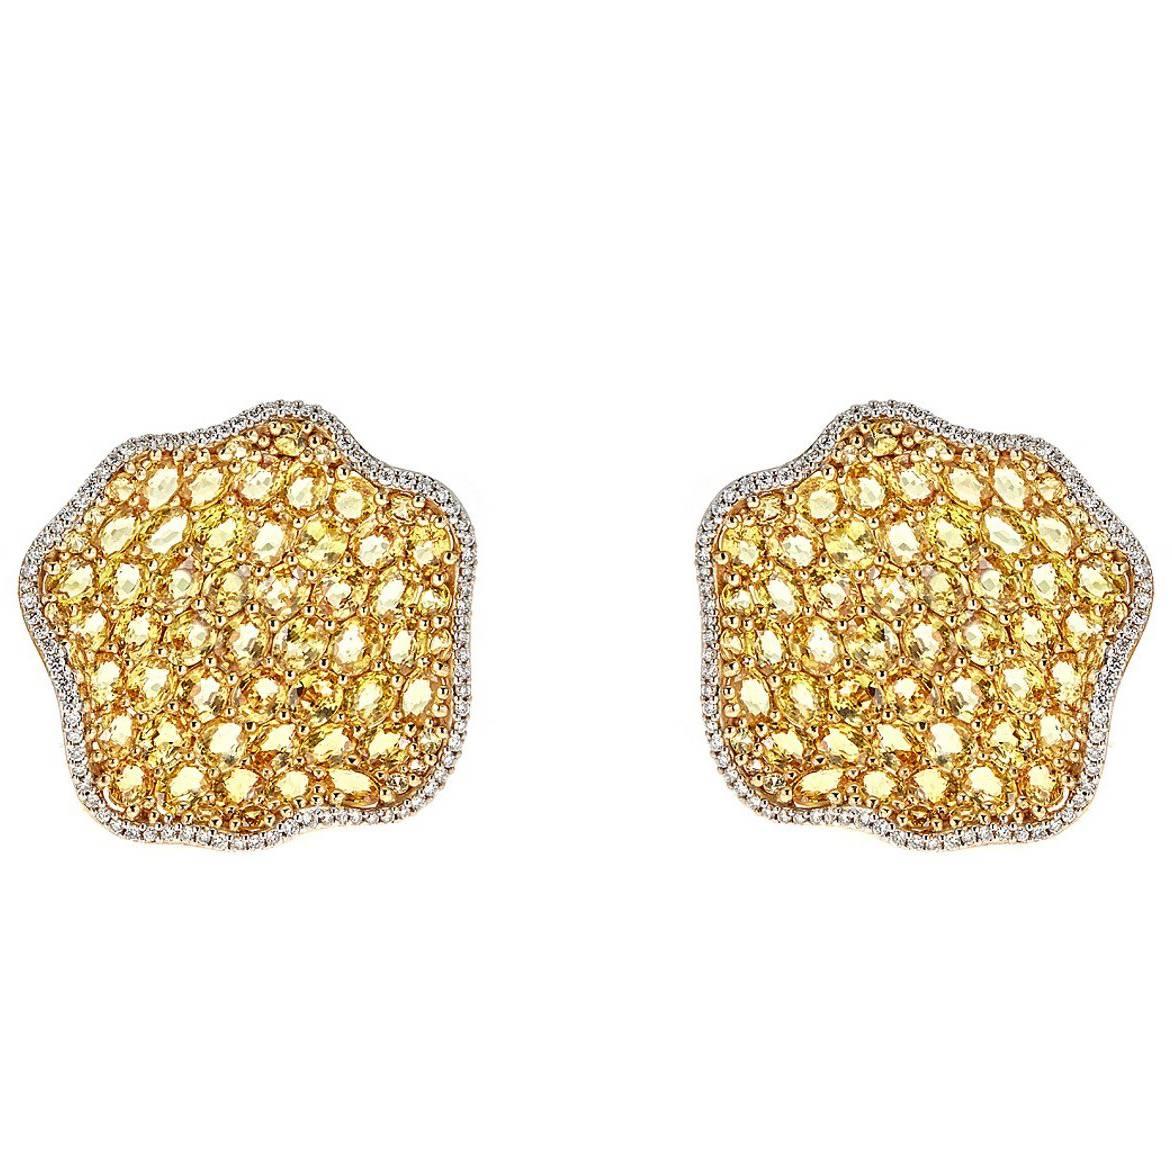 19.46 Carat Yellow Sapphire and 0.69 Carat Diamond Yellow and White Gold Earring For Sale